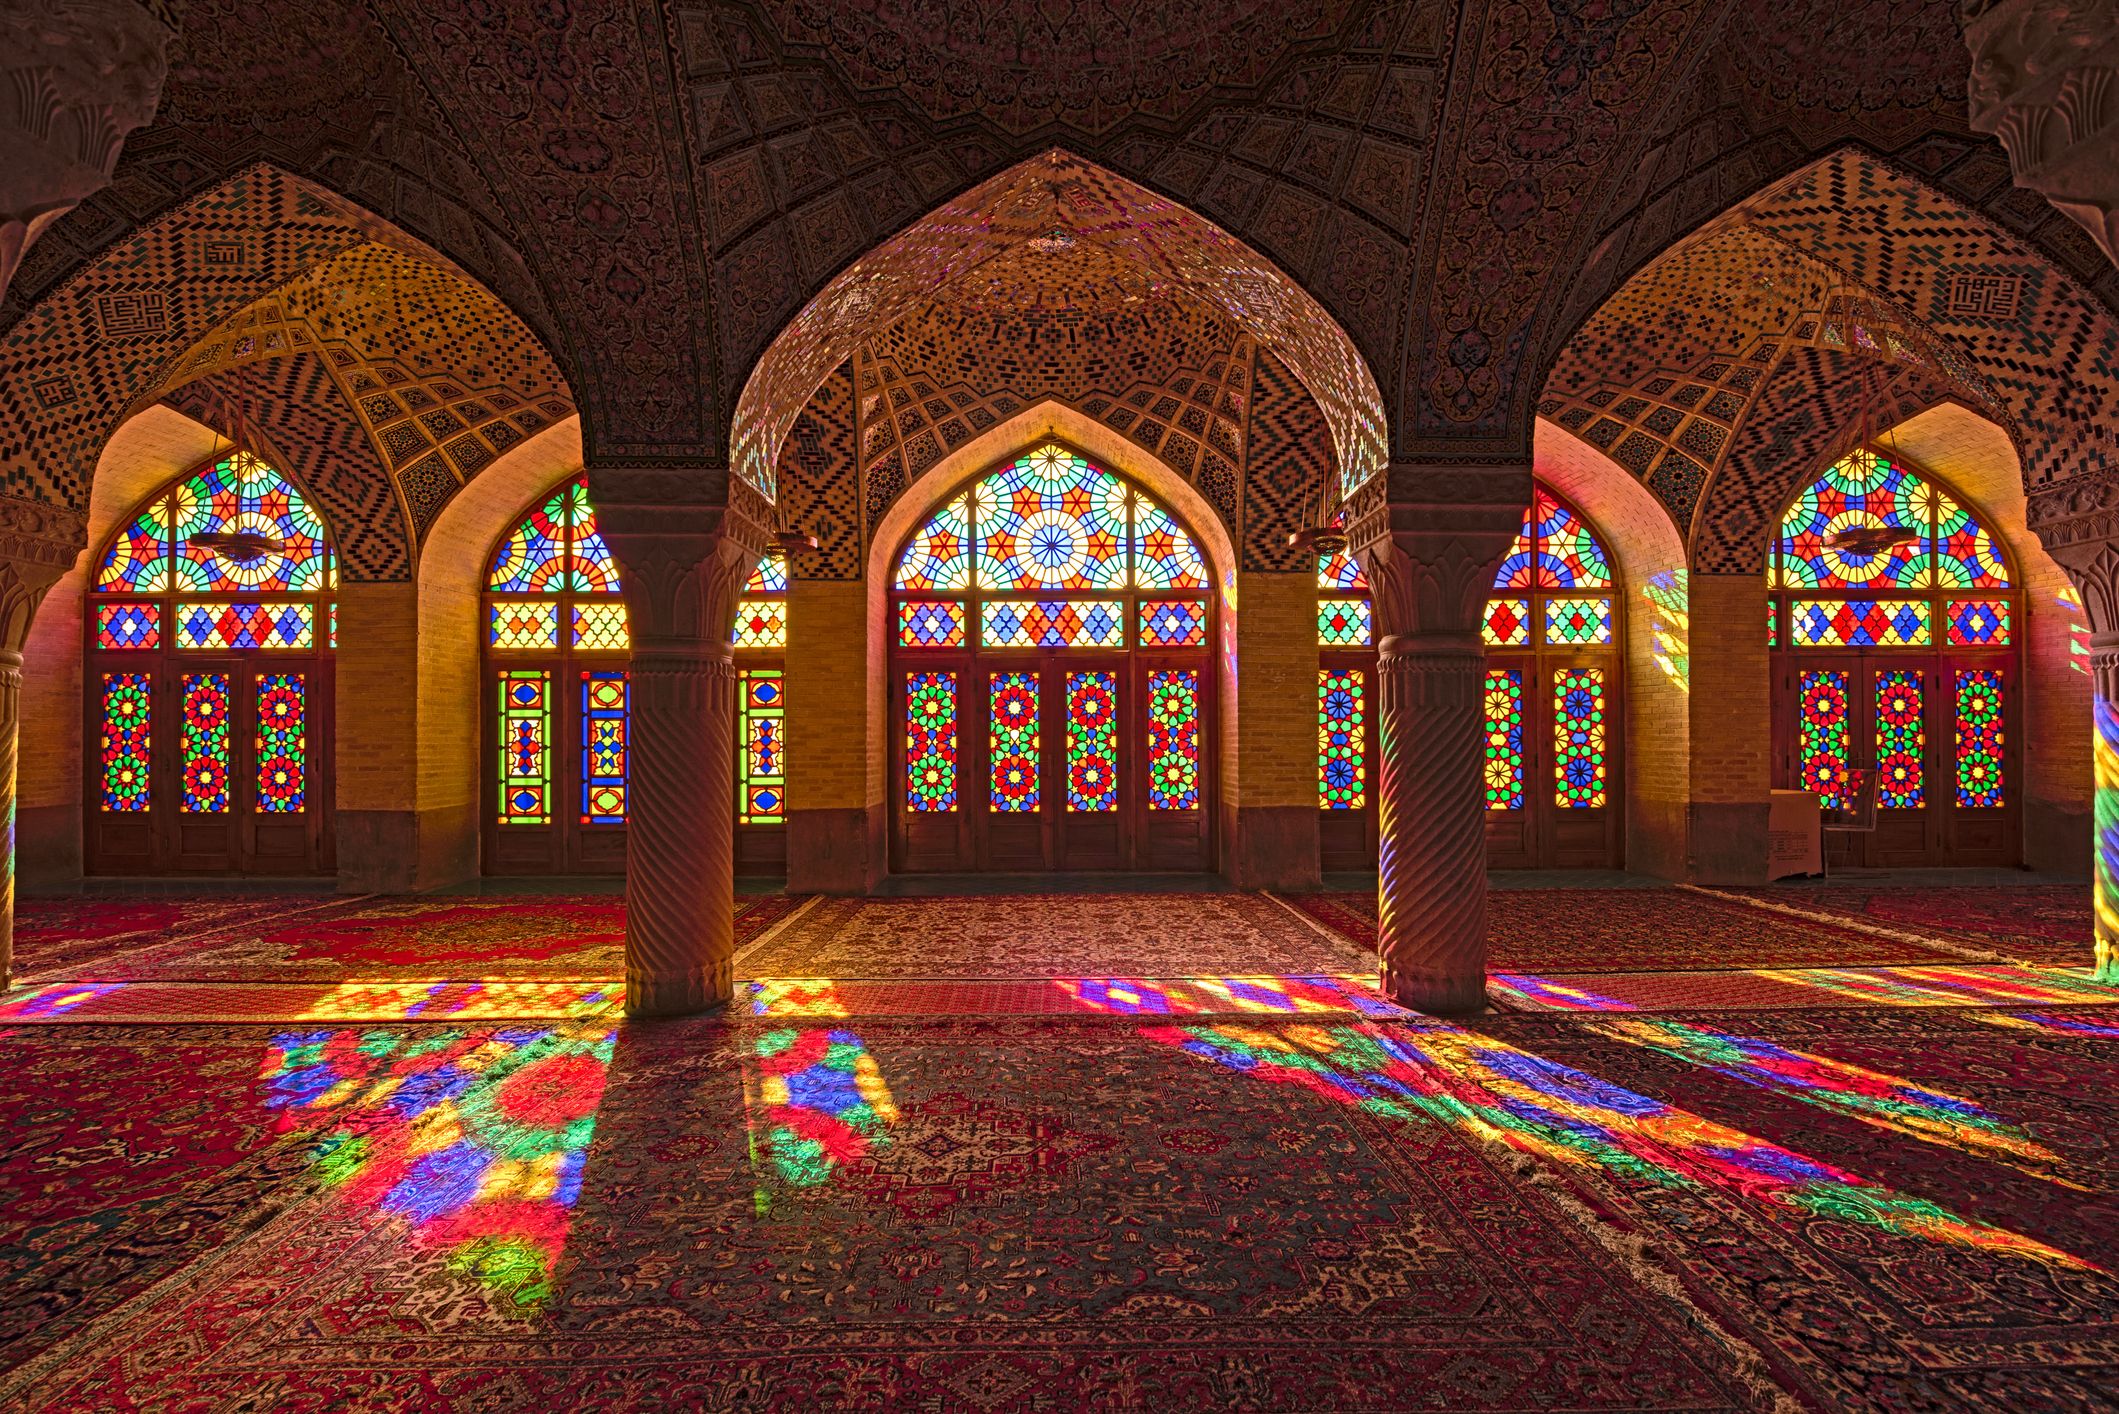 udløb Spytte Patronise 14 Most Beautiful Mosques in the World - Best Mosques to Visit